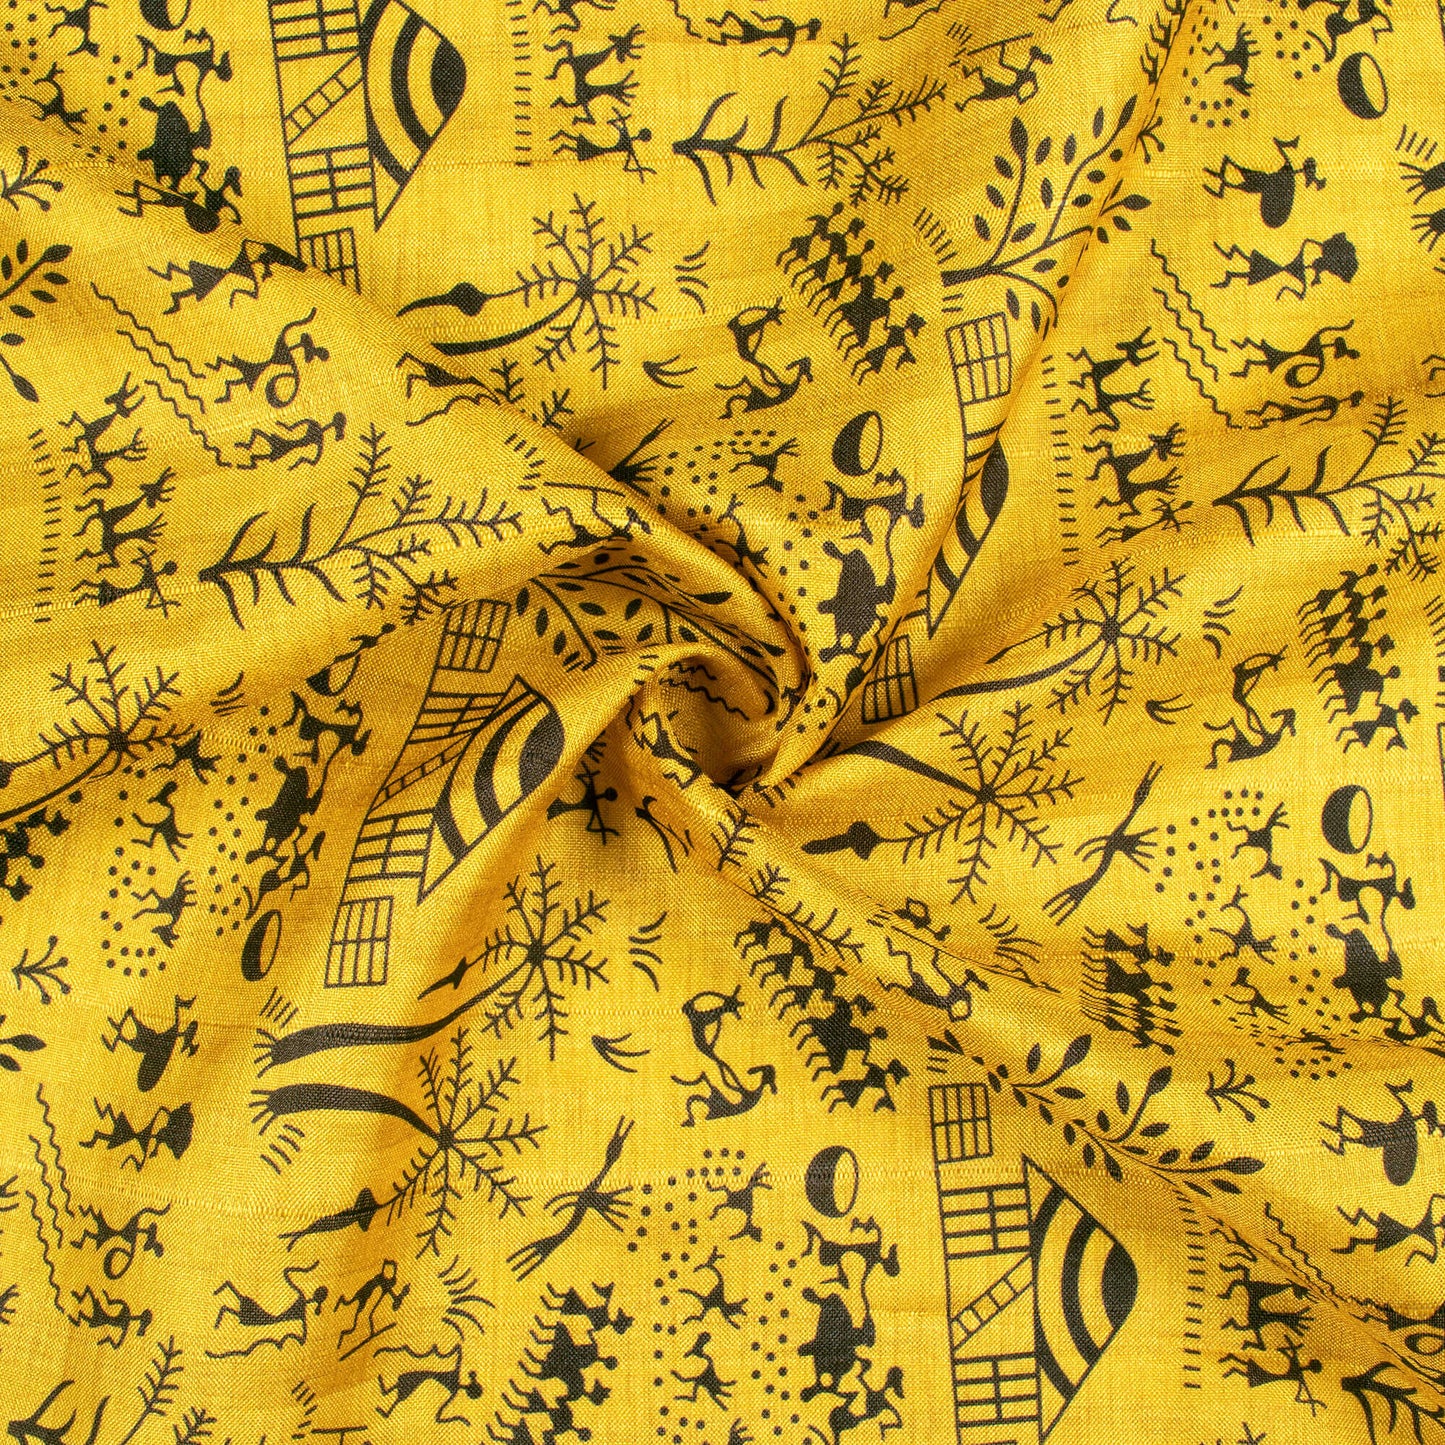 Bumblebee Yellow And Black Quirky Pattern Digital Print Art Tusser Silk Fabric